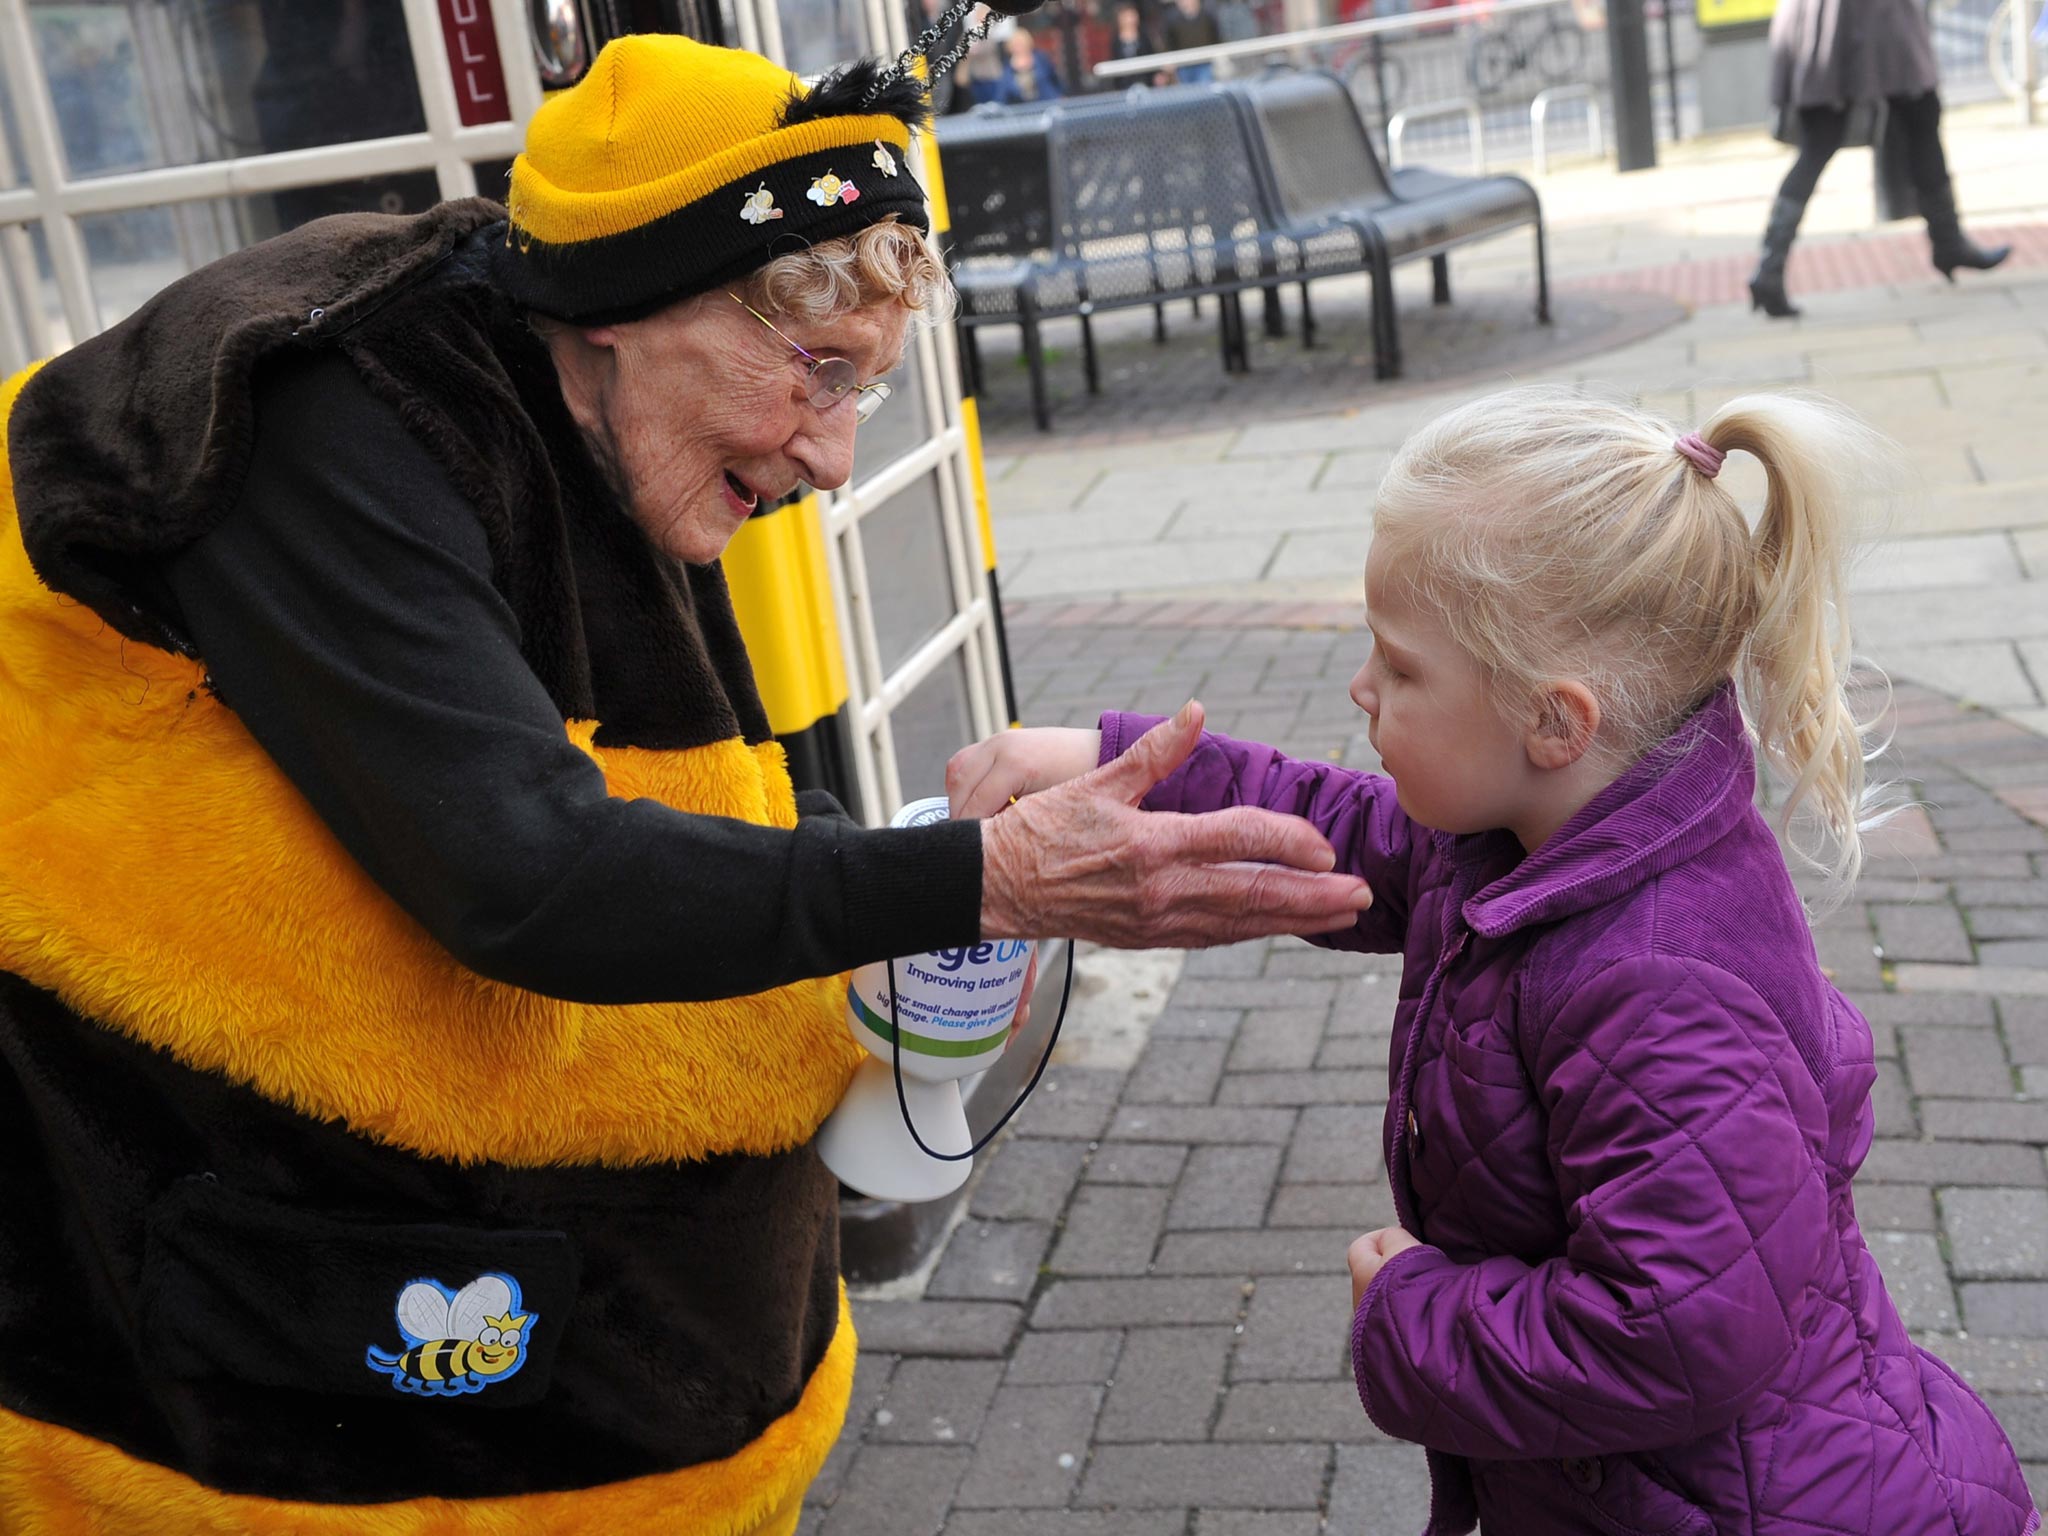 Known as the Busy Bee throughout east Yorkshire, 93-year-old Jean began raising money for Age UK Hull 14 years ago after her husband died. She wears
a bee costume (made by her daughter) while rattling her tin, and has so far collected over £100,000.